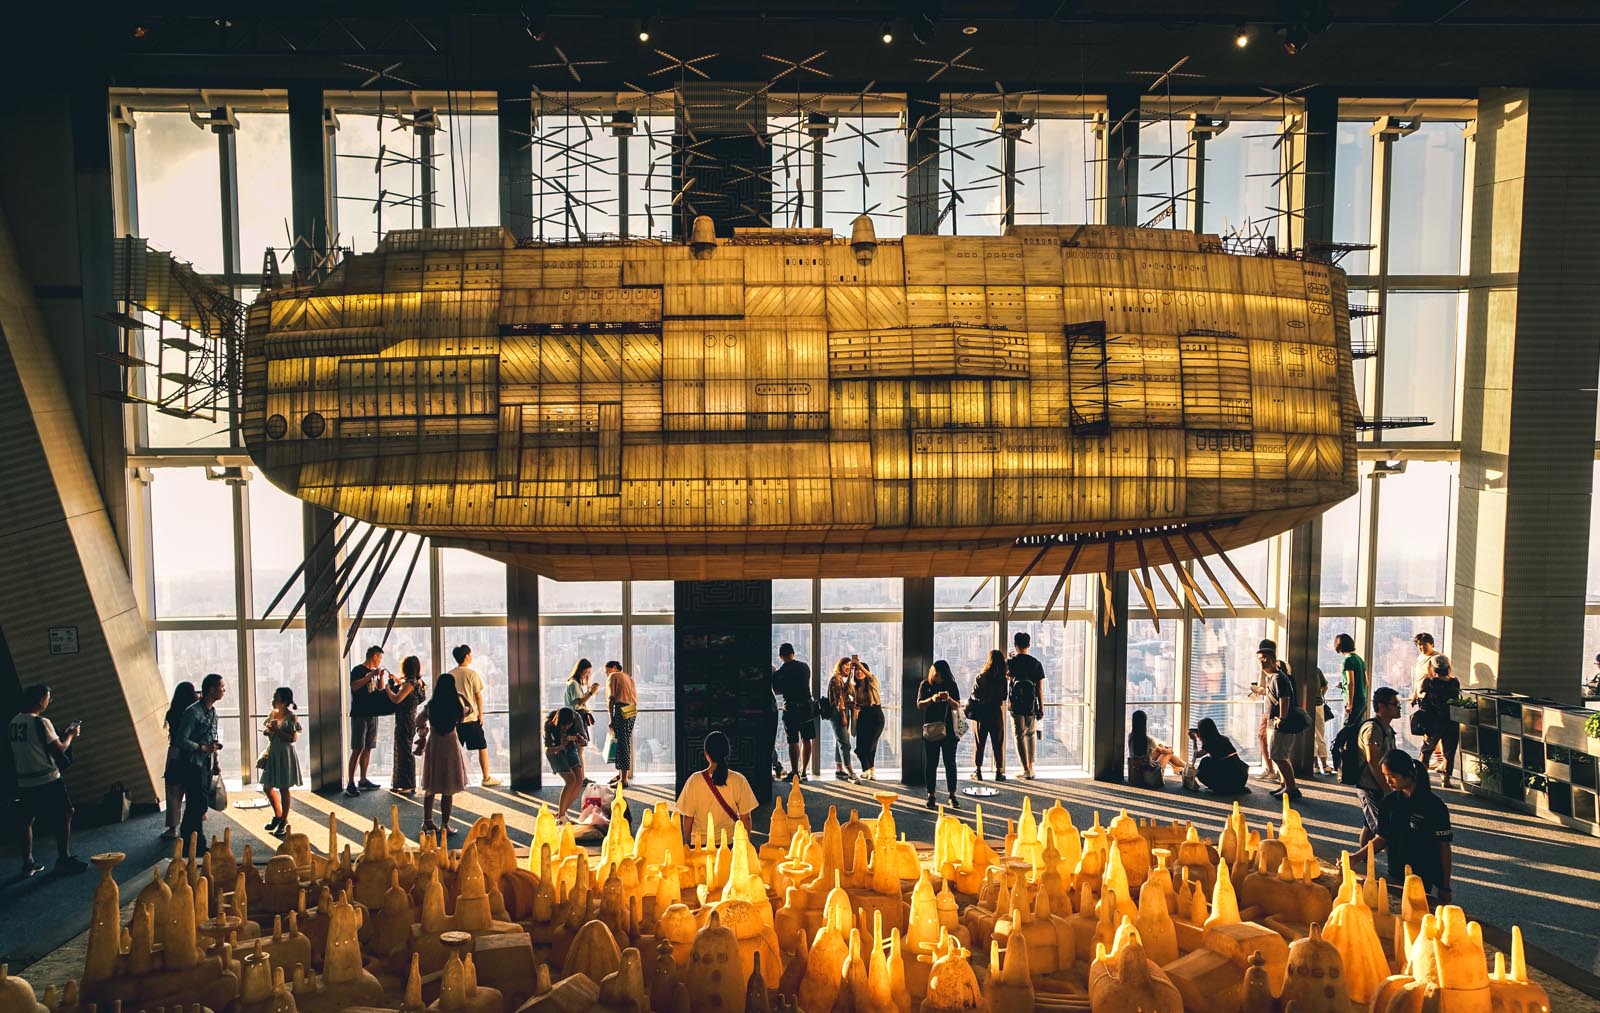 An installation depicting an airship from the works of Studio Ghibli